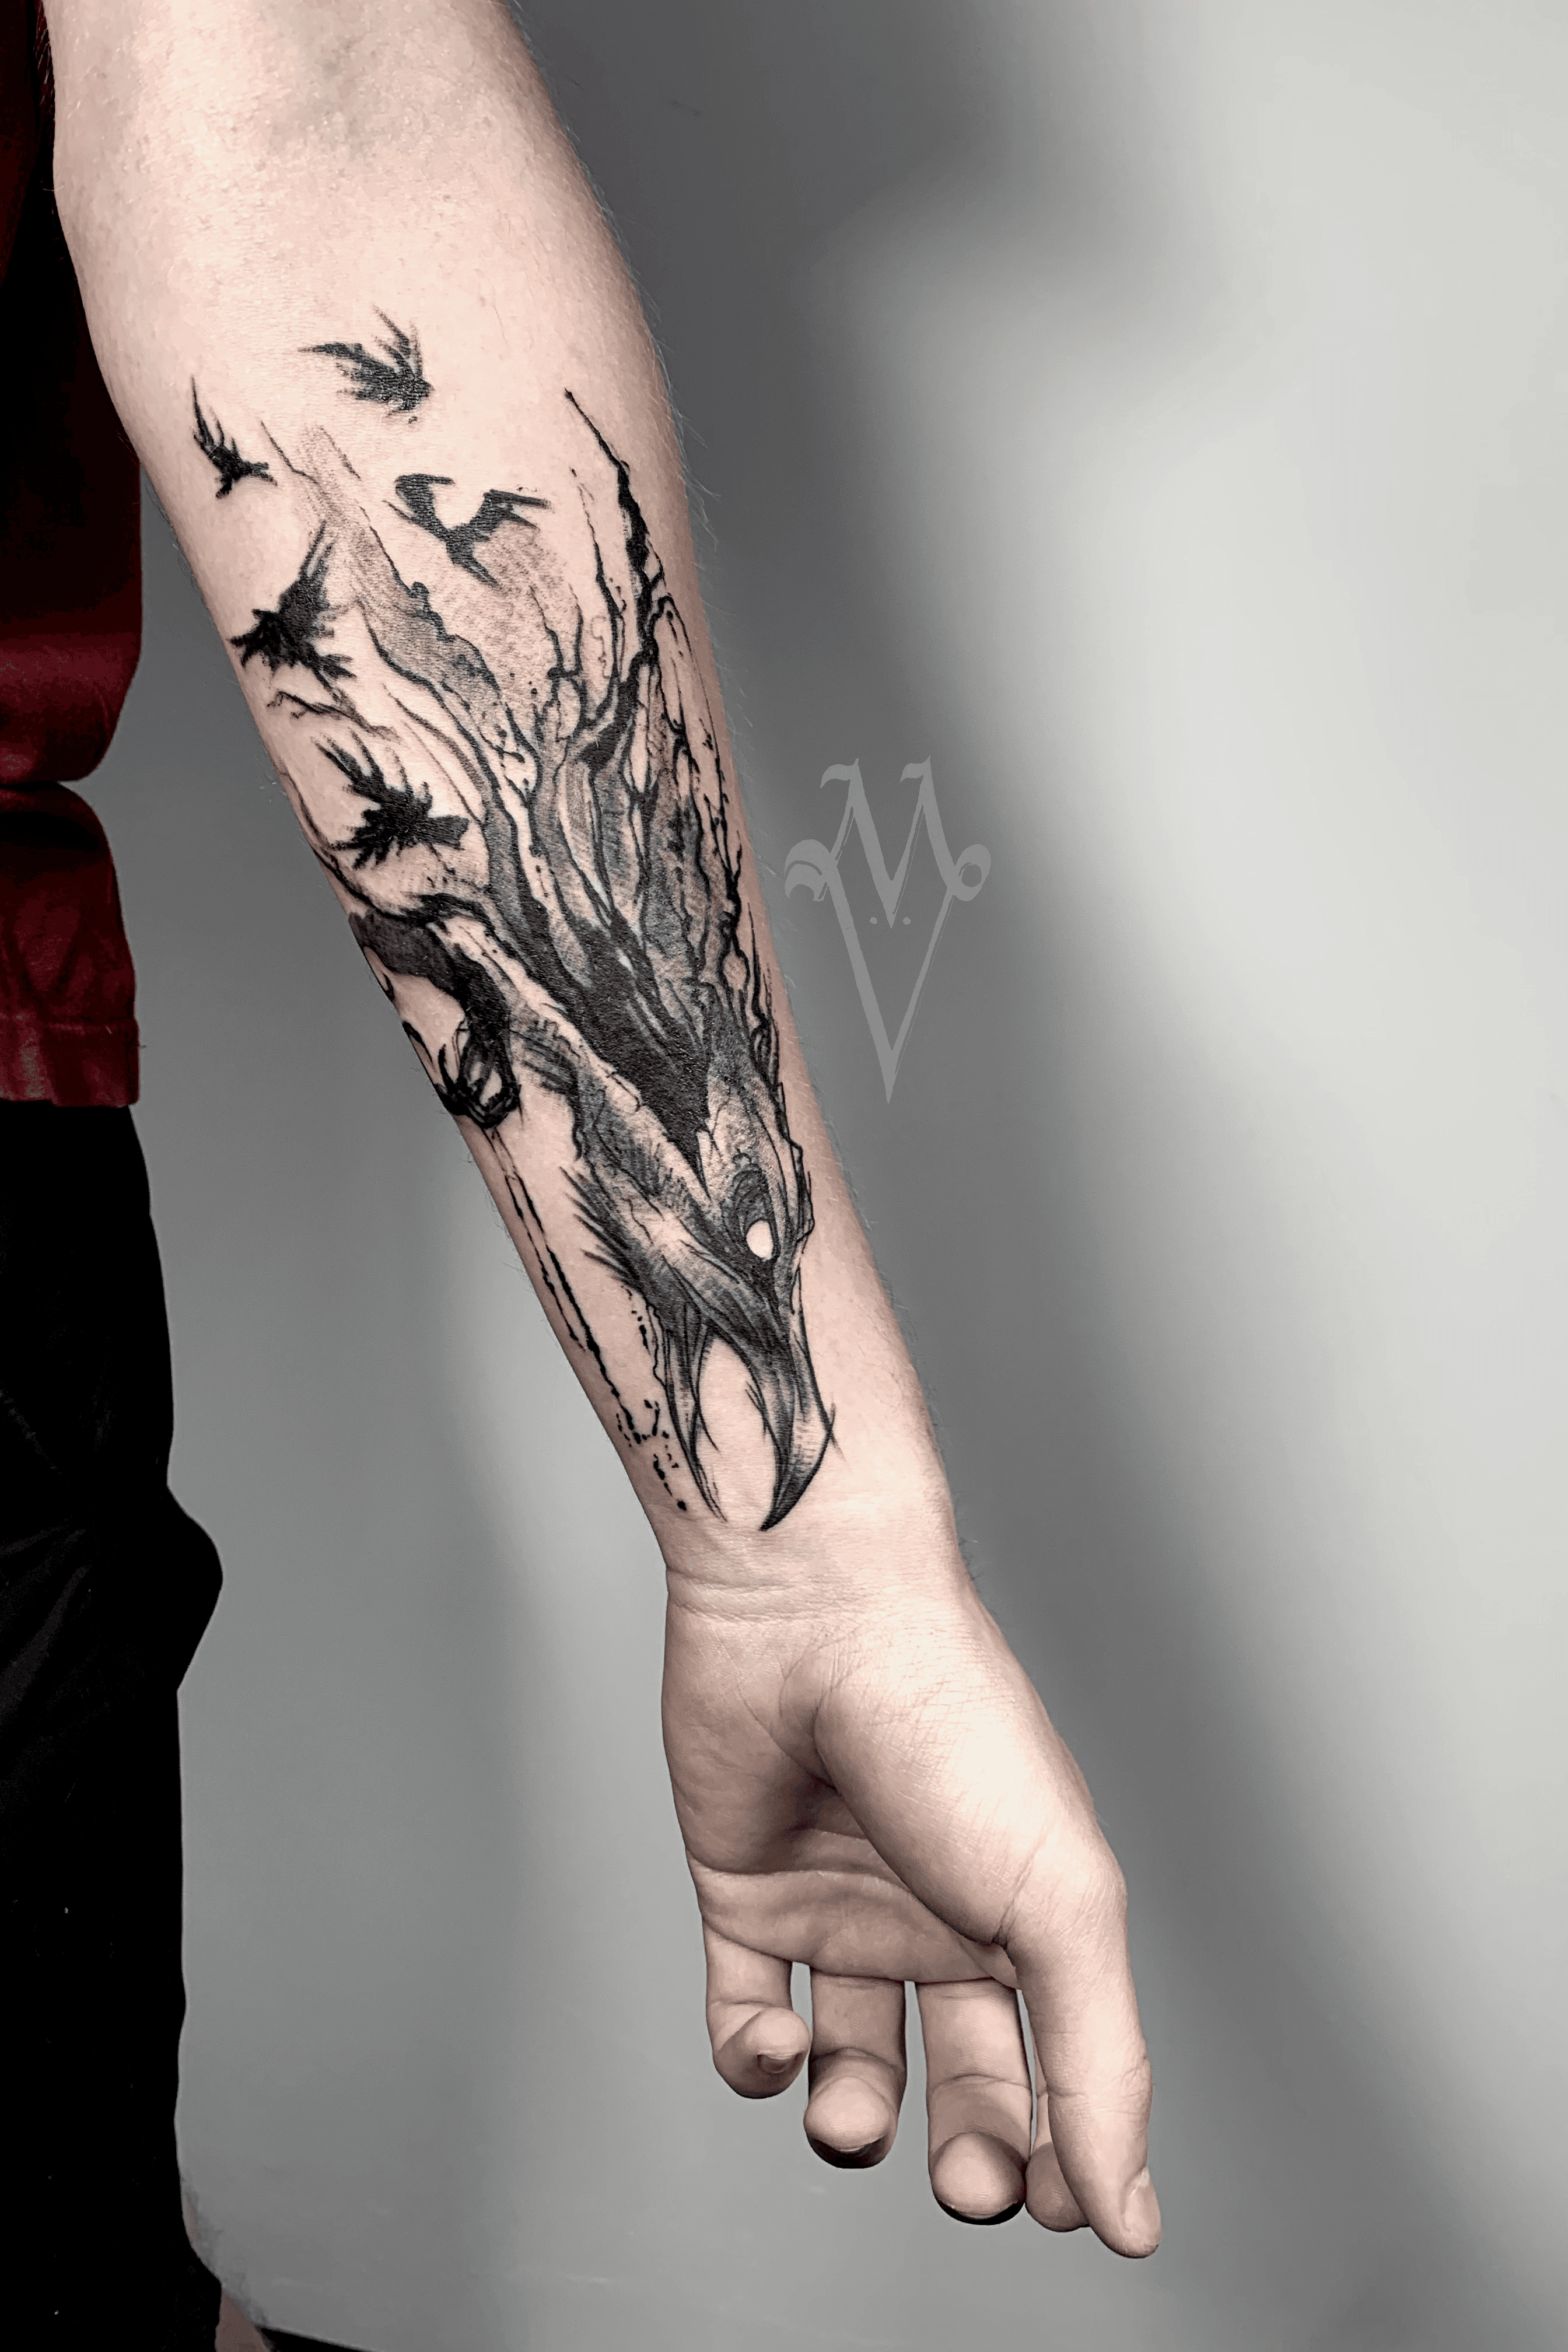 Are You Looking For Best Raven Tattoo Designs   by Umair Bhai  Medium